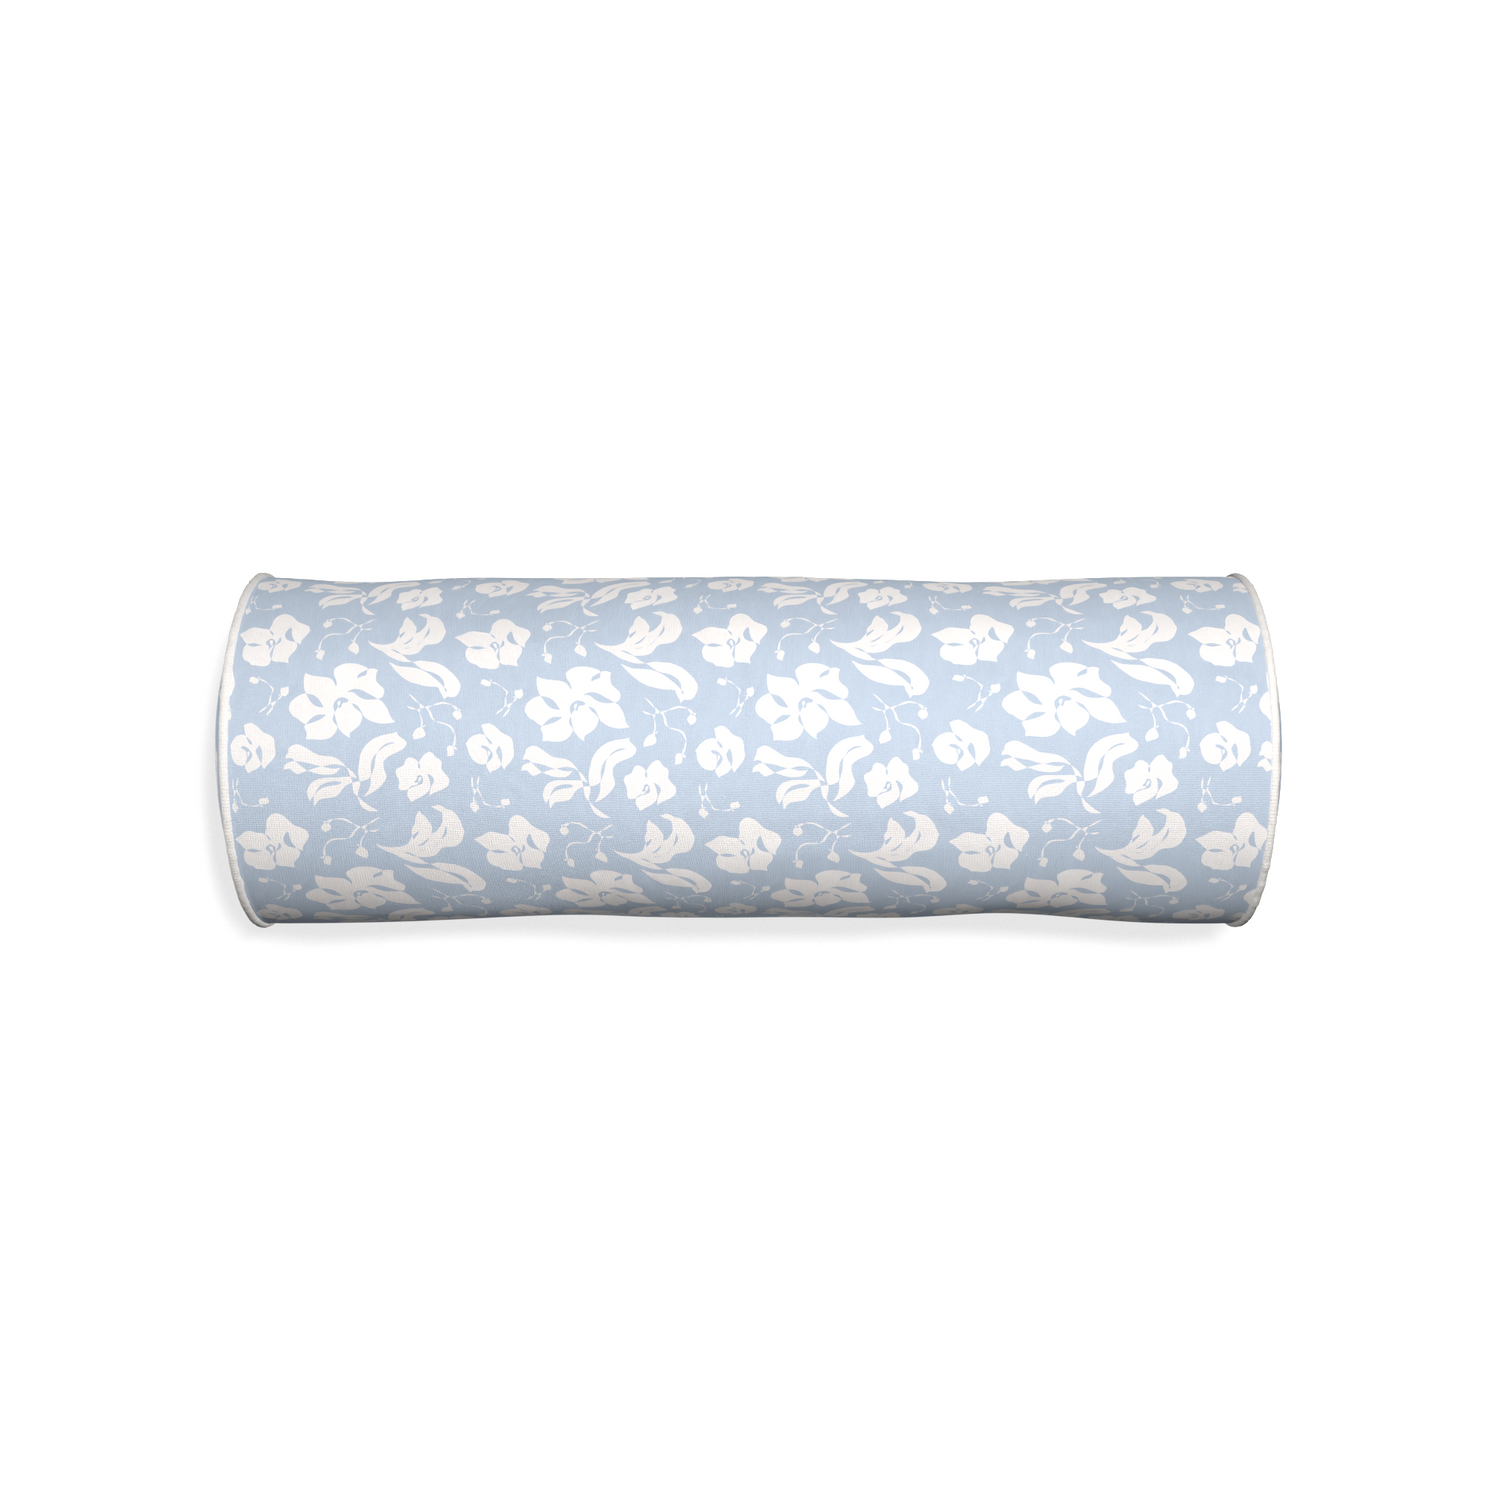 Bolster georgia custom cornflower blue floralpillow with snow piping on white background